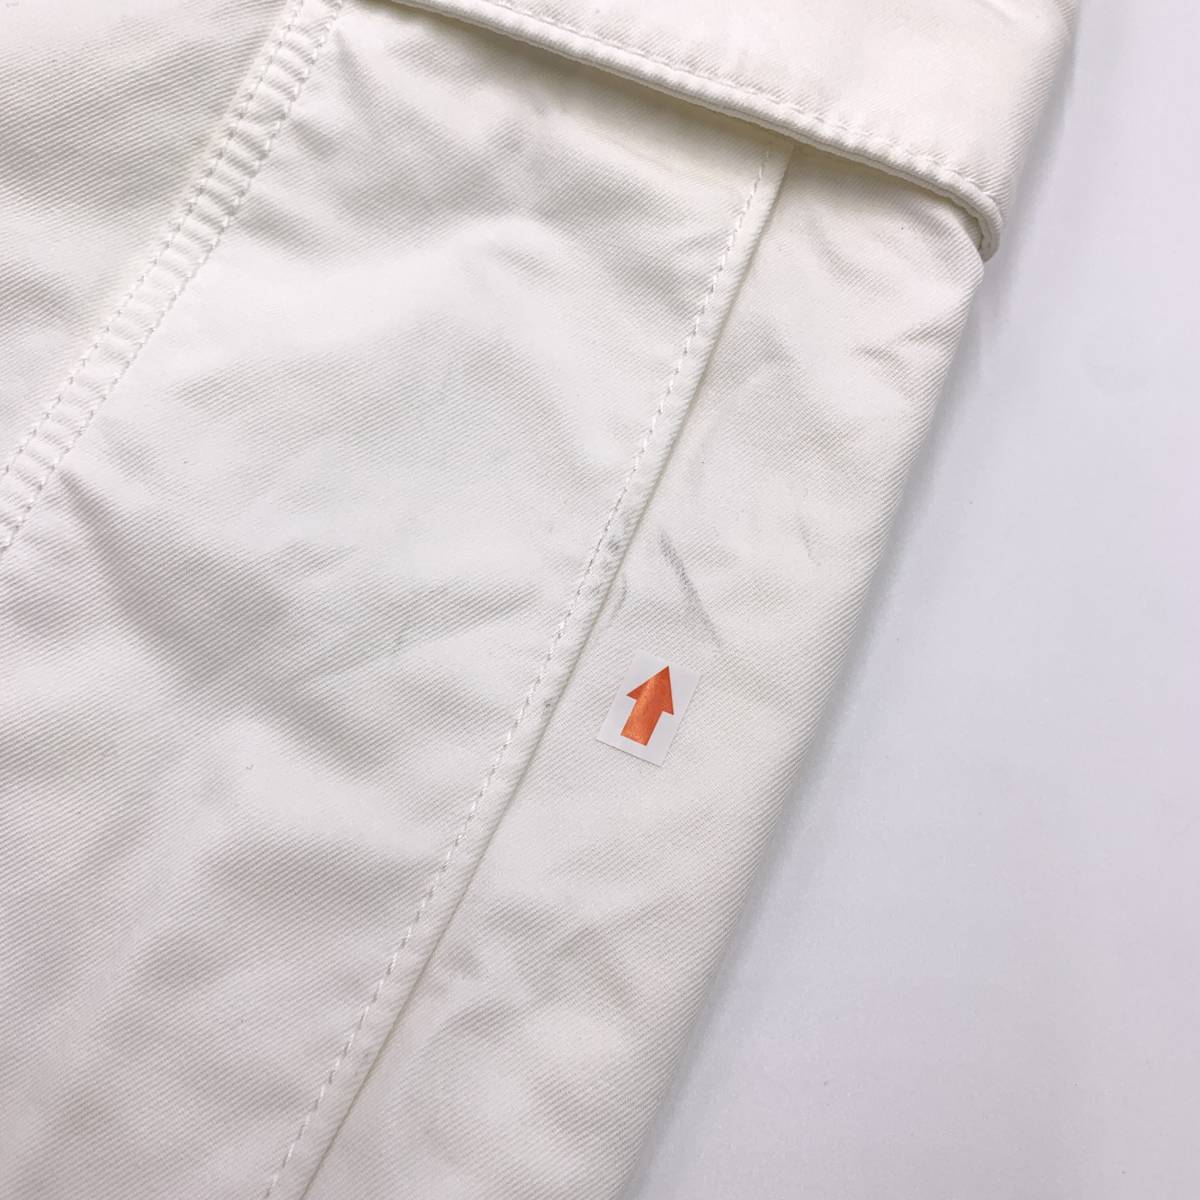 2019SS LOUIS VUITTON by Virgil Abloh ルイヴィトン ワイド ミリタリー カーゴ パンツ size 40